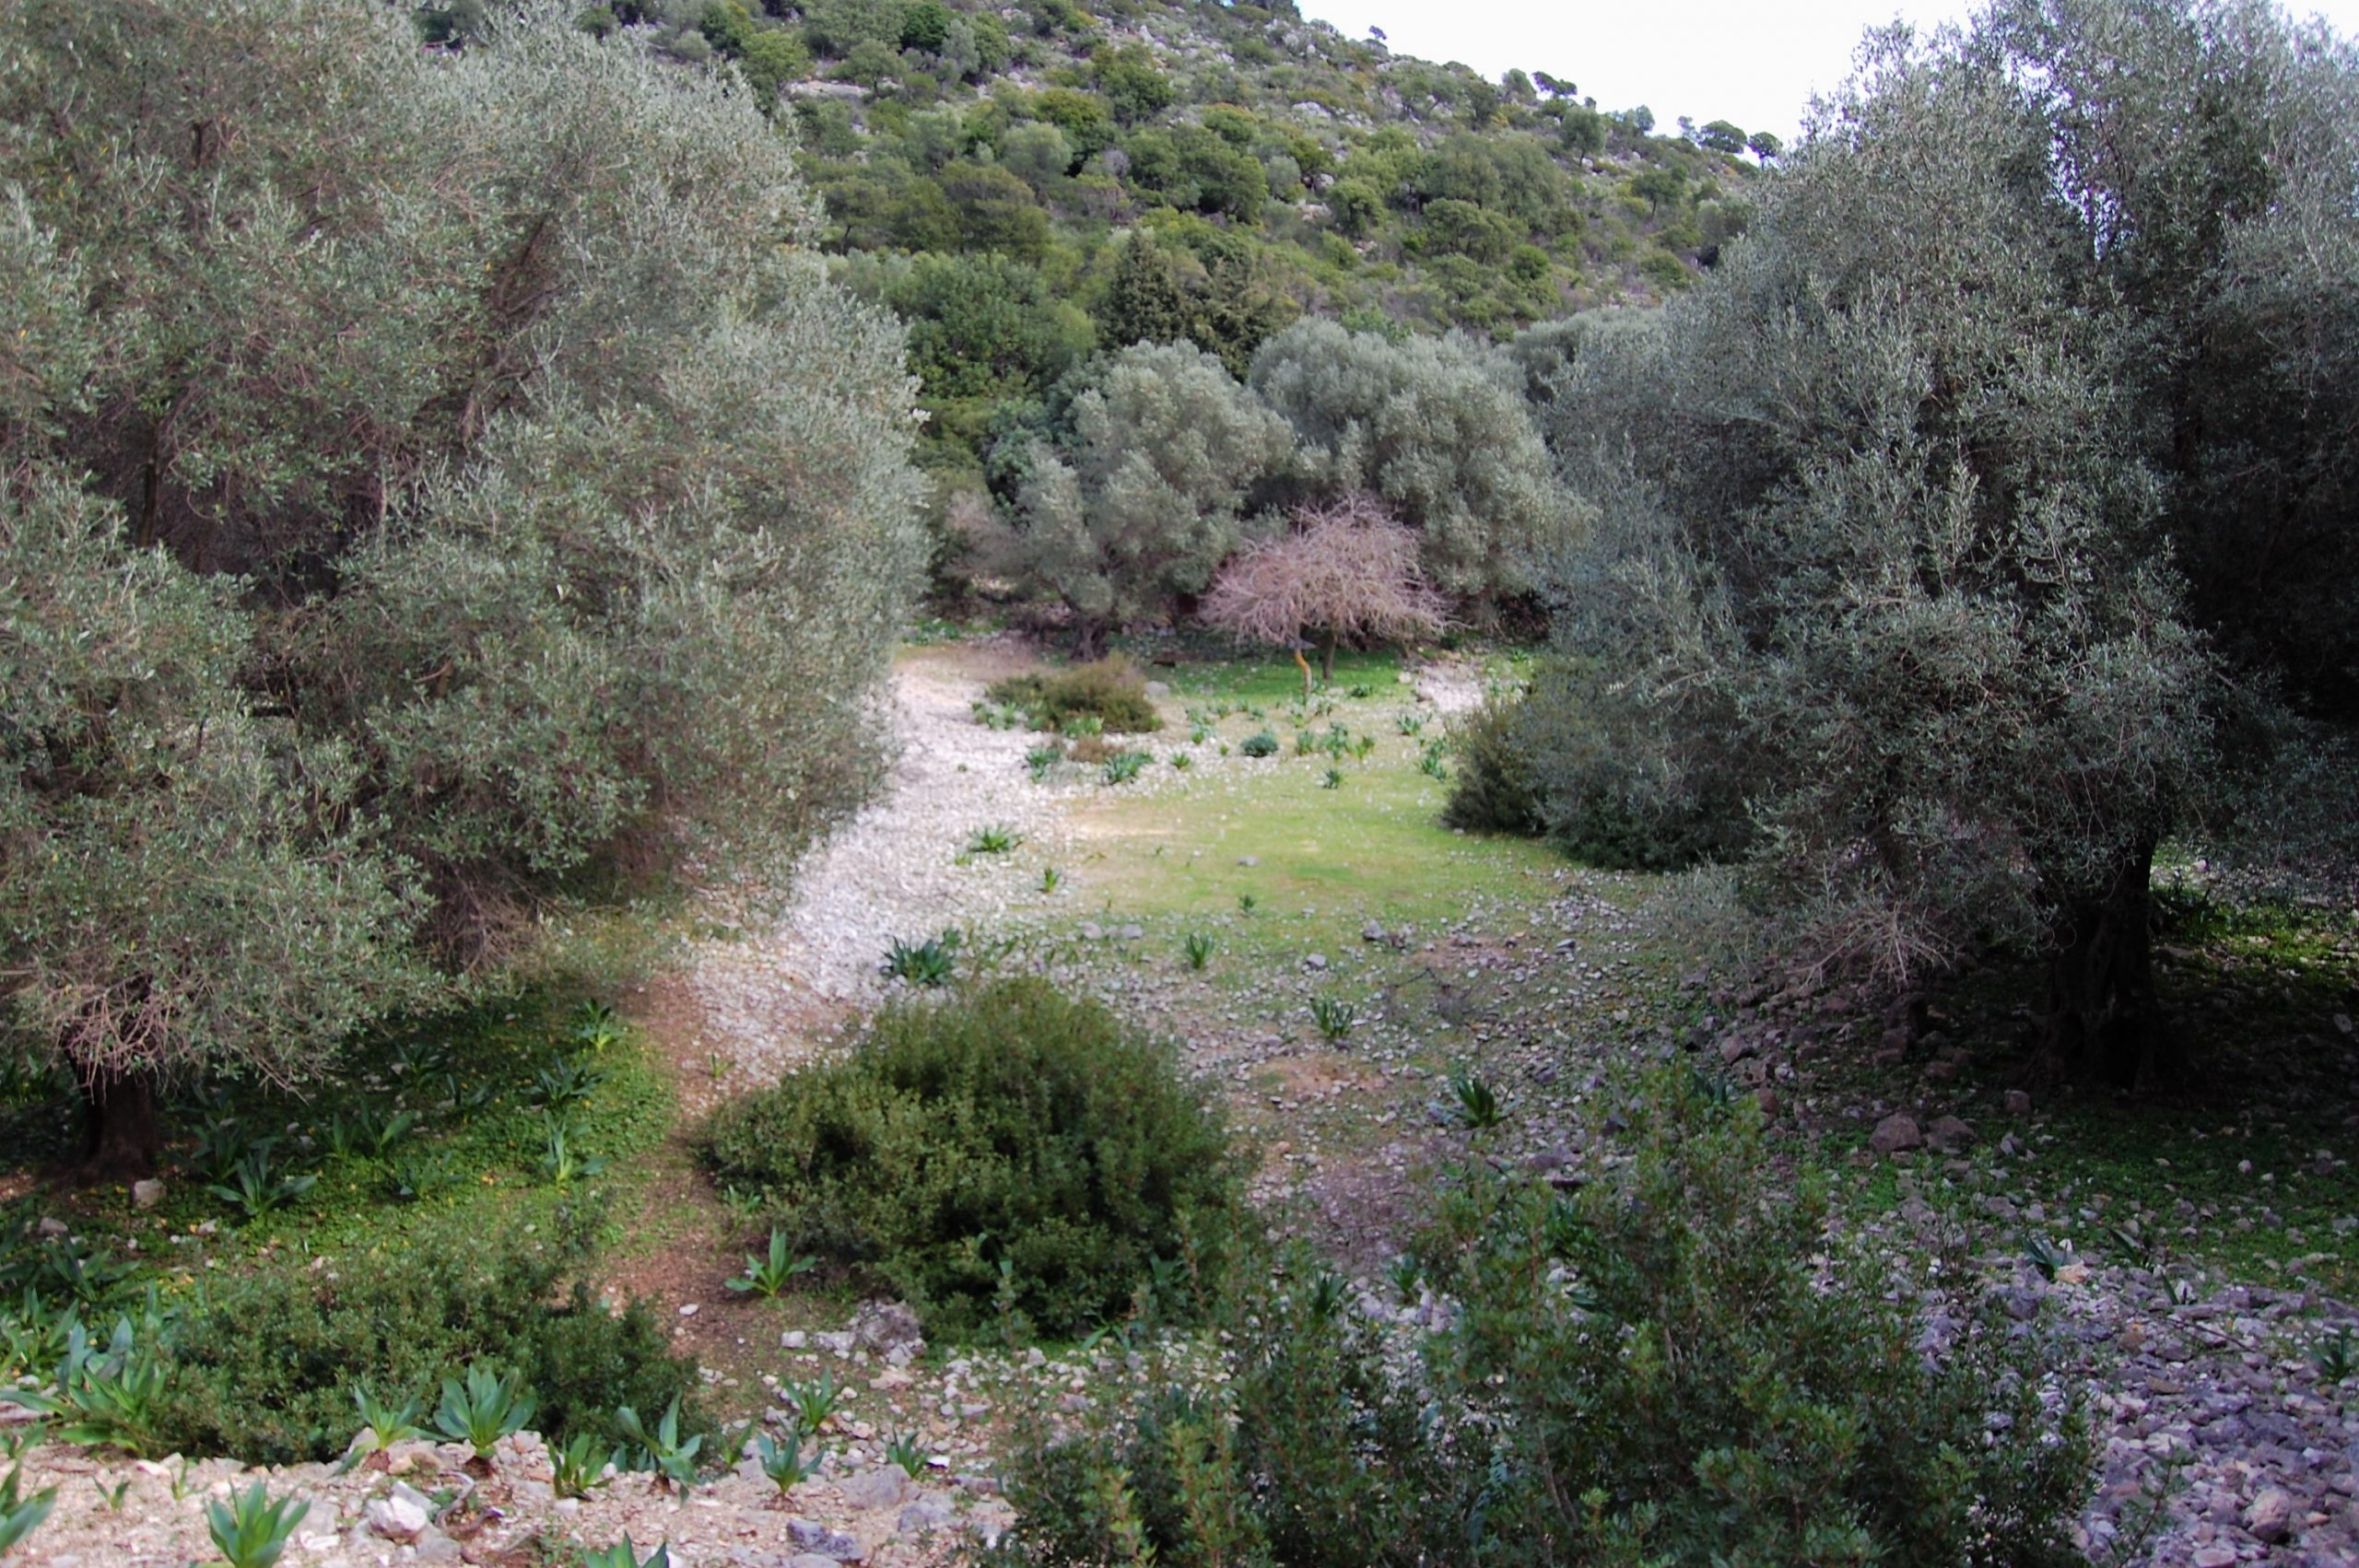 Landscape and terrain of land for sale on Ithaca Greece in Marmakas